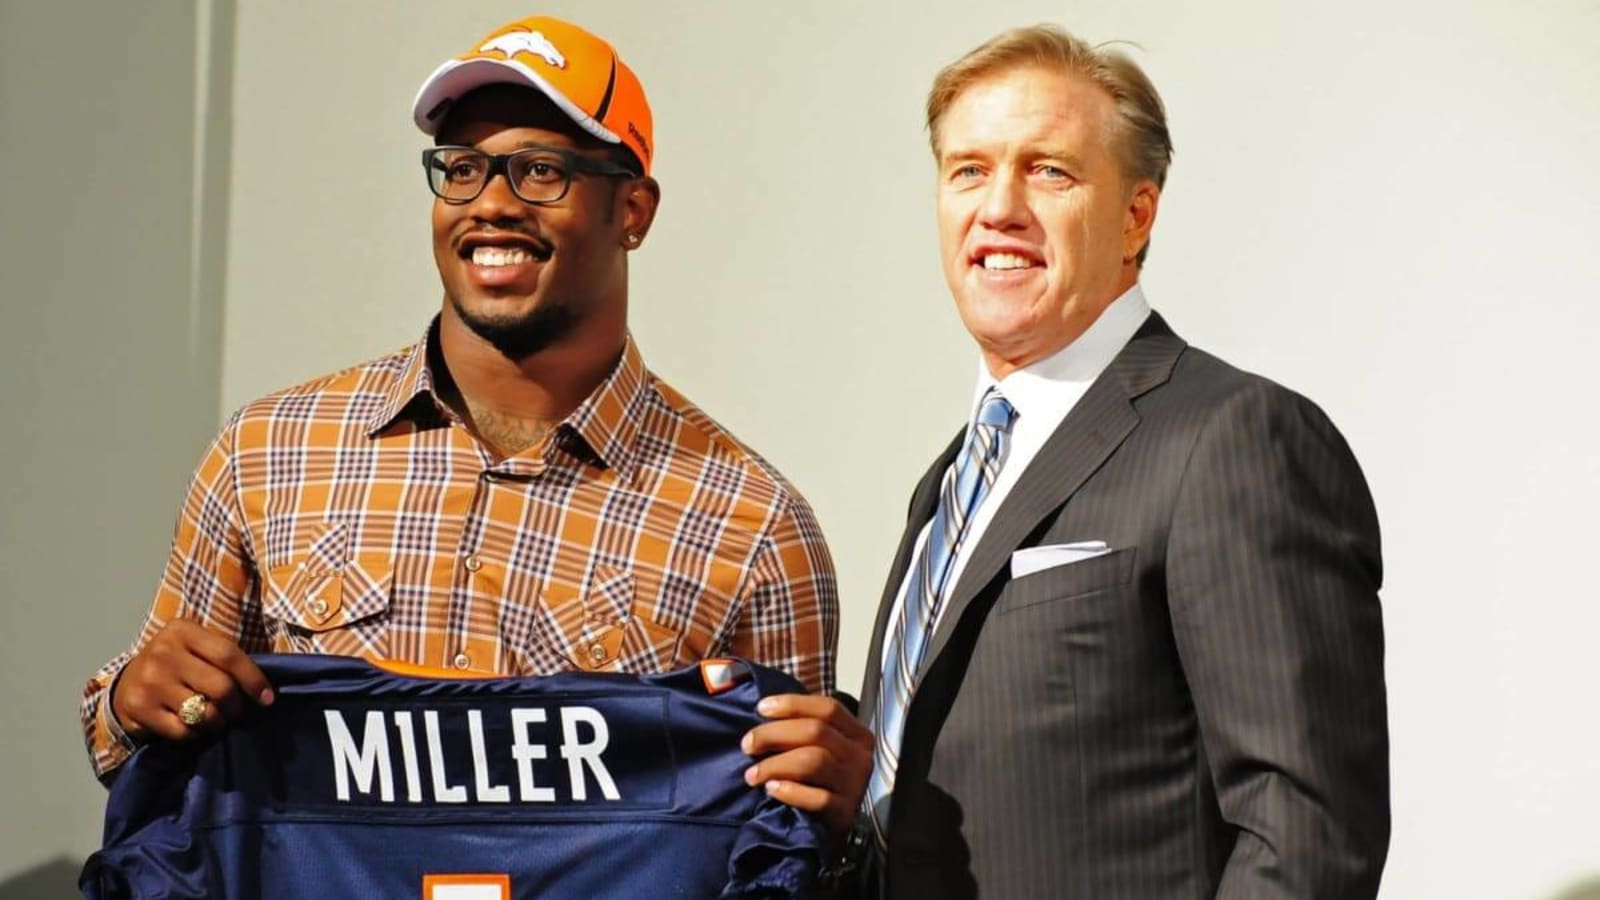 Von Miller Inspired by John Elway to Become an NFL GM